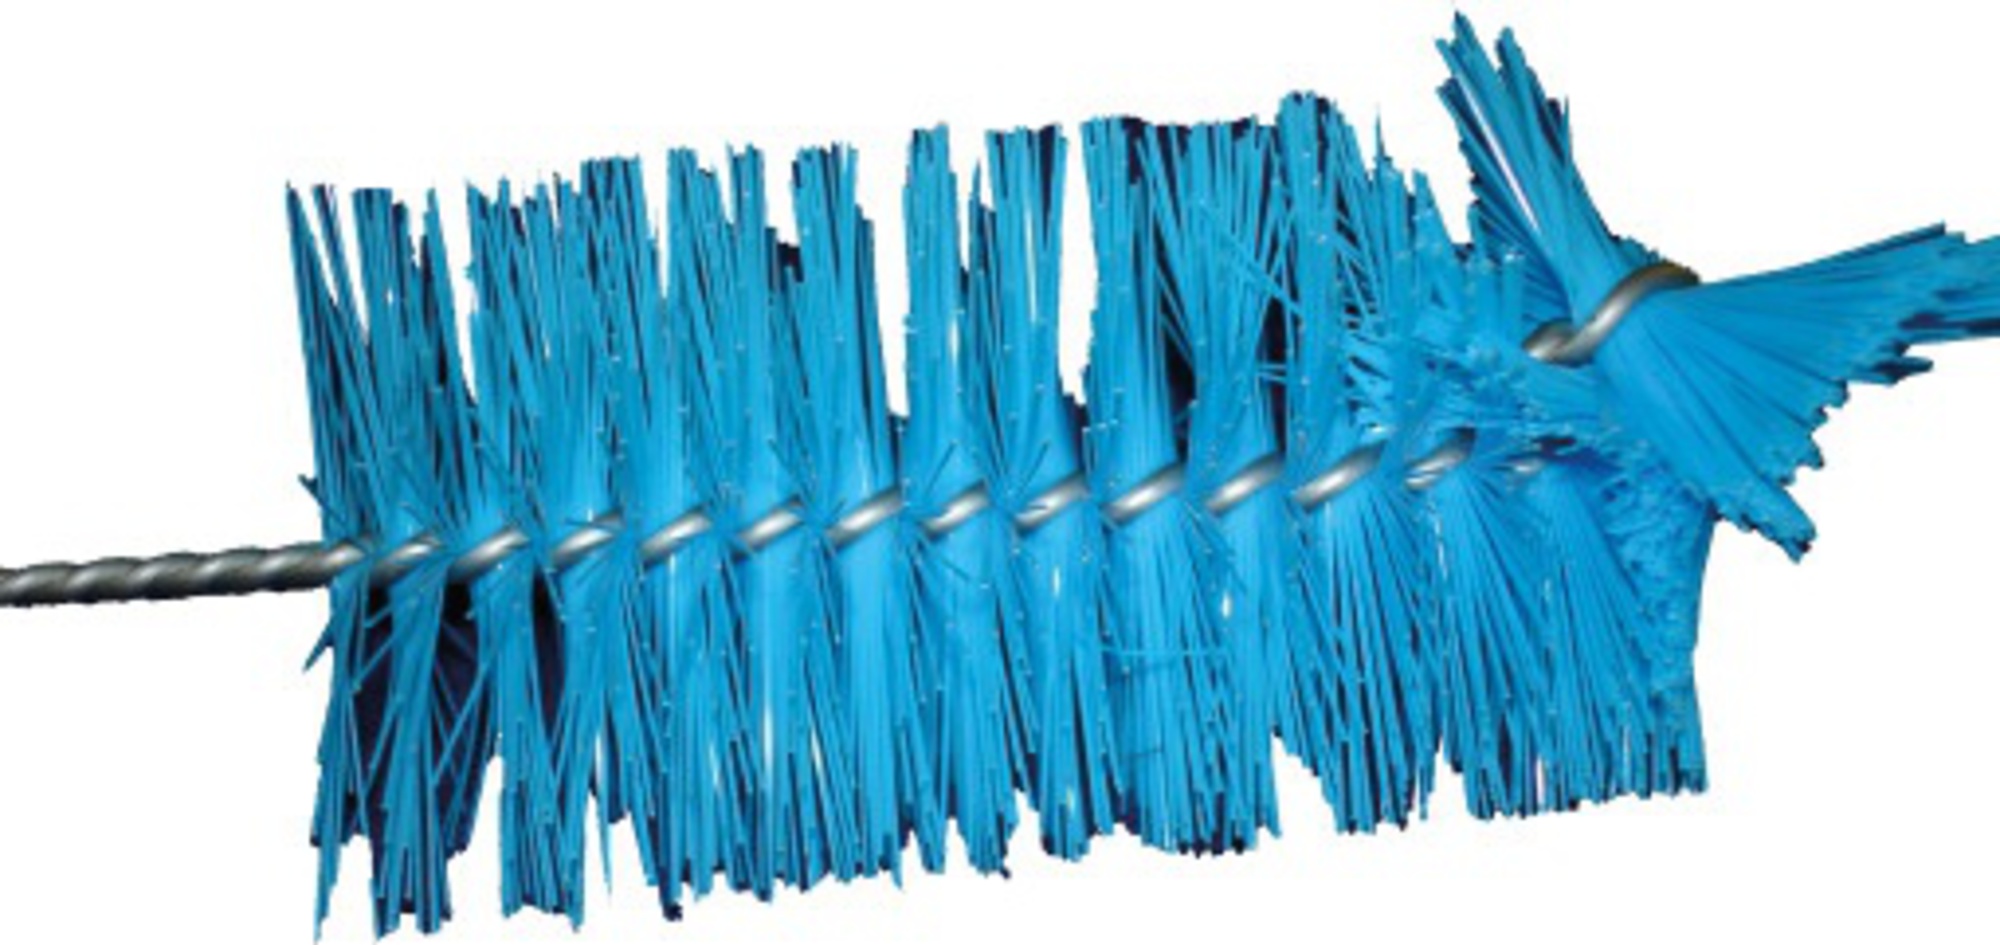 Large Instrument Cleaning Brushes